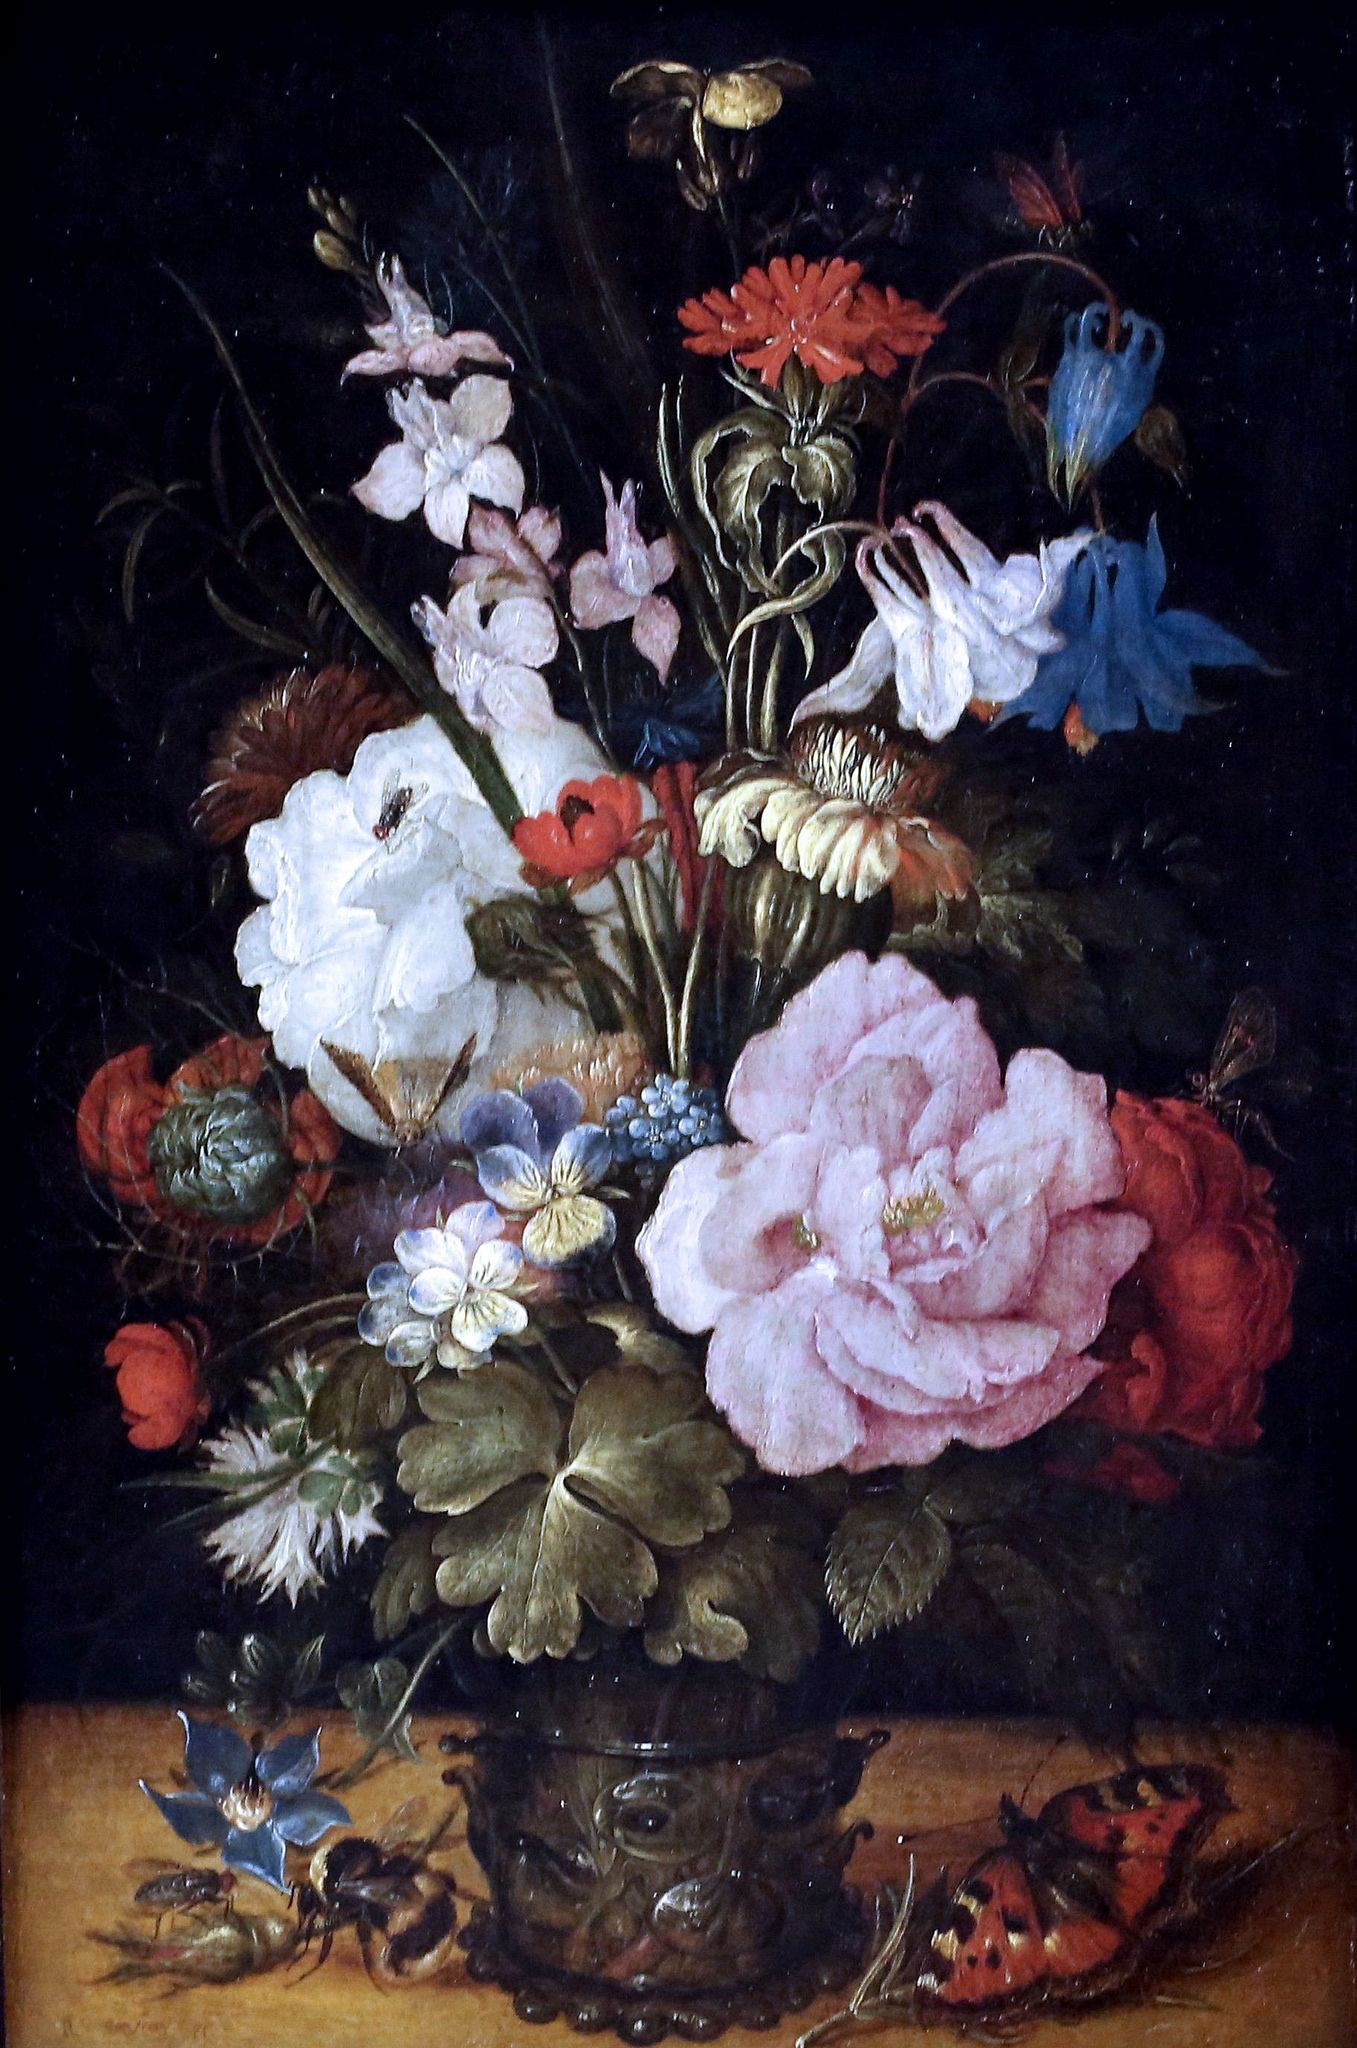 10 Great Vase Of Flowers De Heem 2024 free download vase of flowers de heem of jan davidsz de heem dutch 1606 1684 vase of flowers c throughout bouquet of flowers about 1615 lille